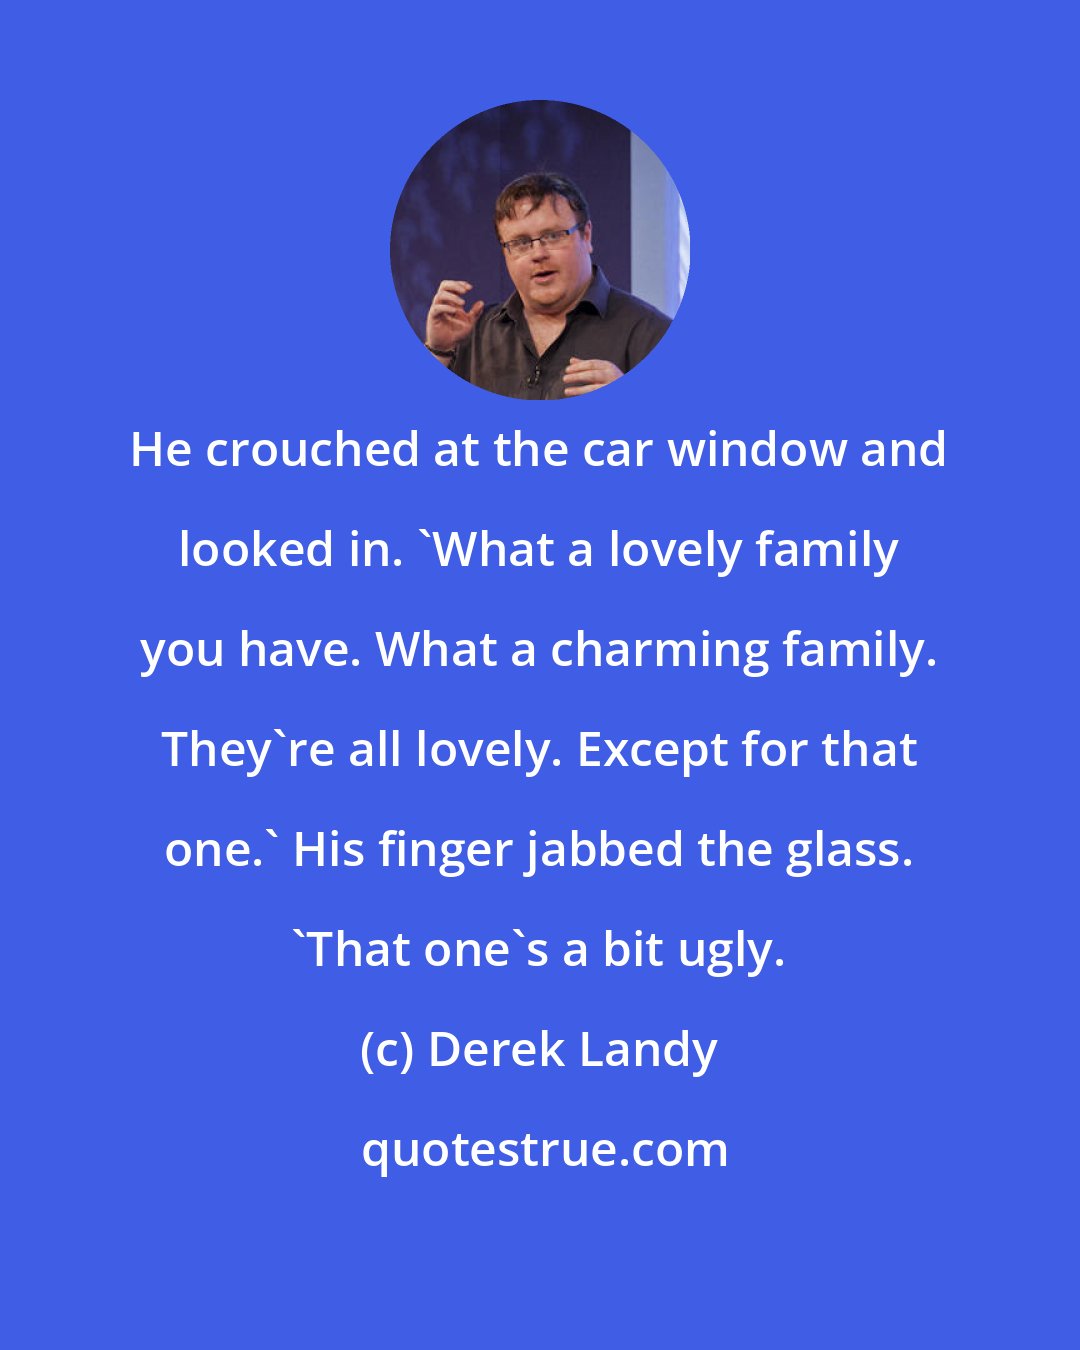 Derek Landy: He crouched at the car window and looked in. 'What a lovely family you have. What a charming family. They're all lovely. Except for that one.' His finger jabbed the glass. 'That one's a bit ugly.